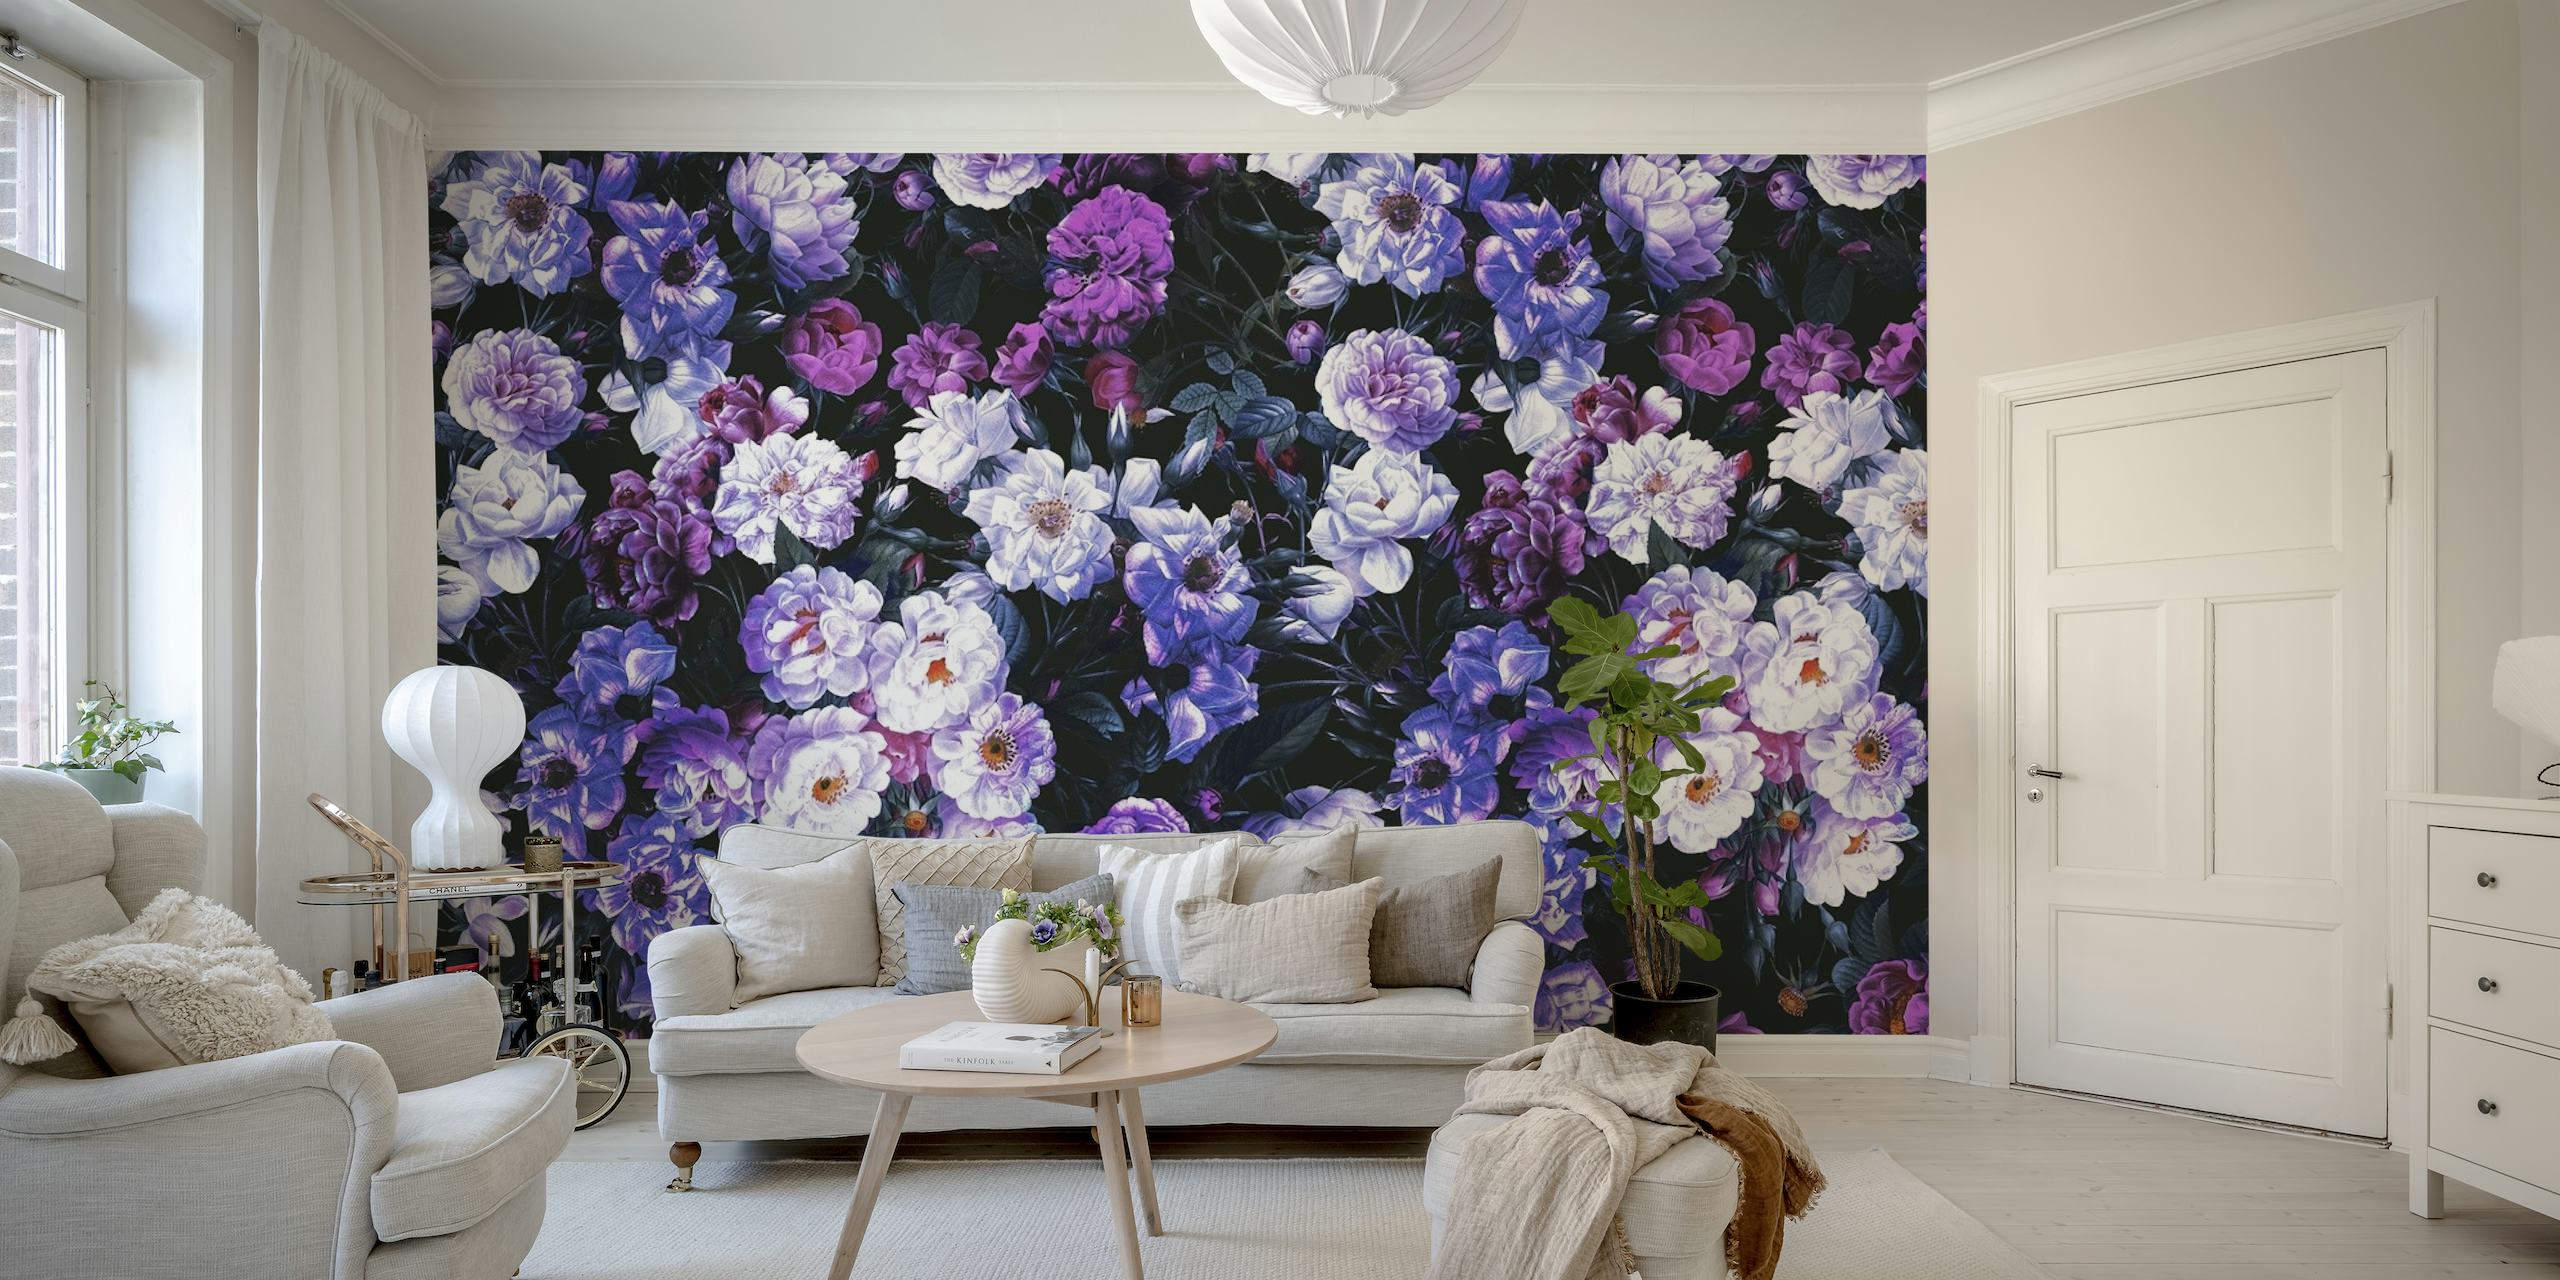 Dark floral rose garden wall mural with a nighttime theme